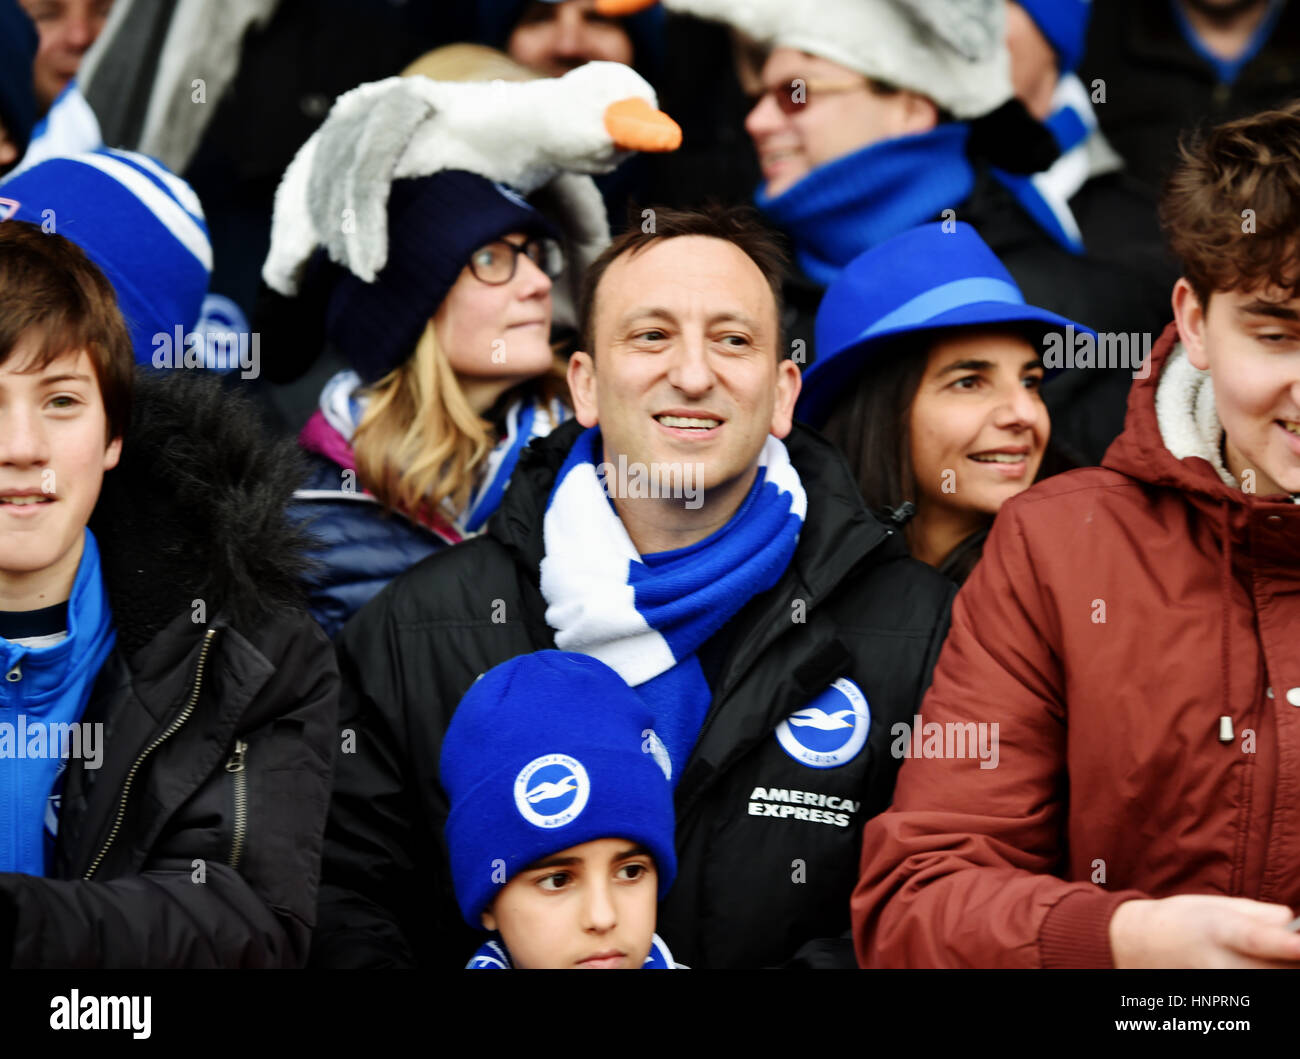 Brighton Football Club chairman Tony Bloom amongst the fans with wife Linda during the Sky Bet Championship match between Brentford and Brighton and Hove Albion at Griffin Park in London. February 5, 2017. Simon  Dack / Telephoto Images Stock Photo